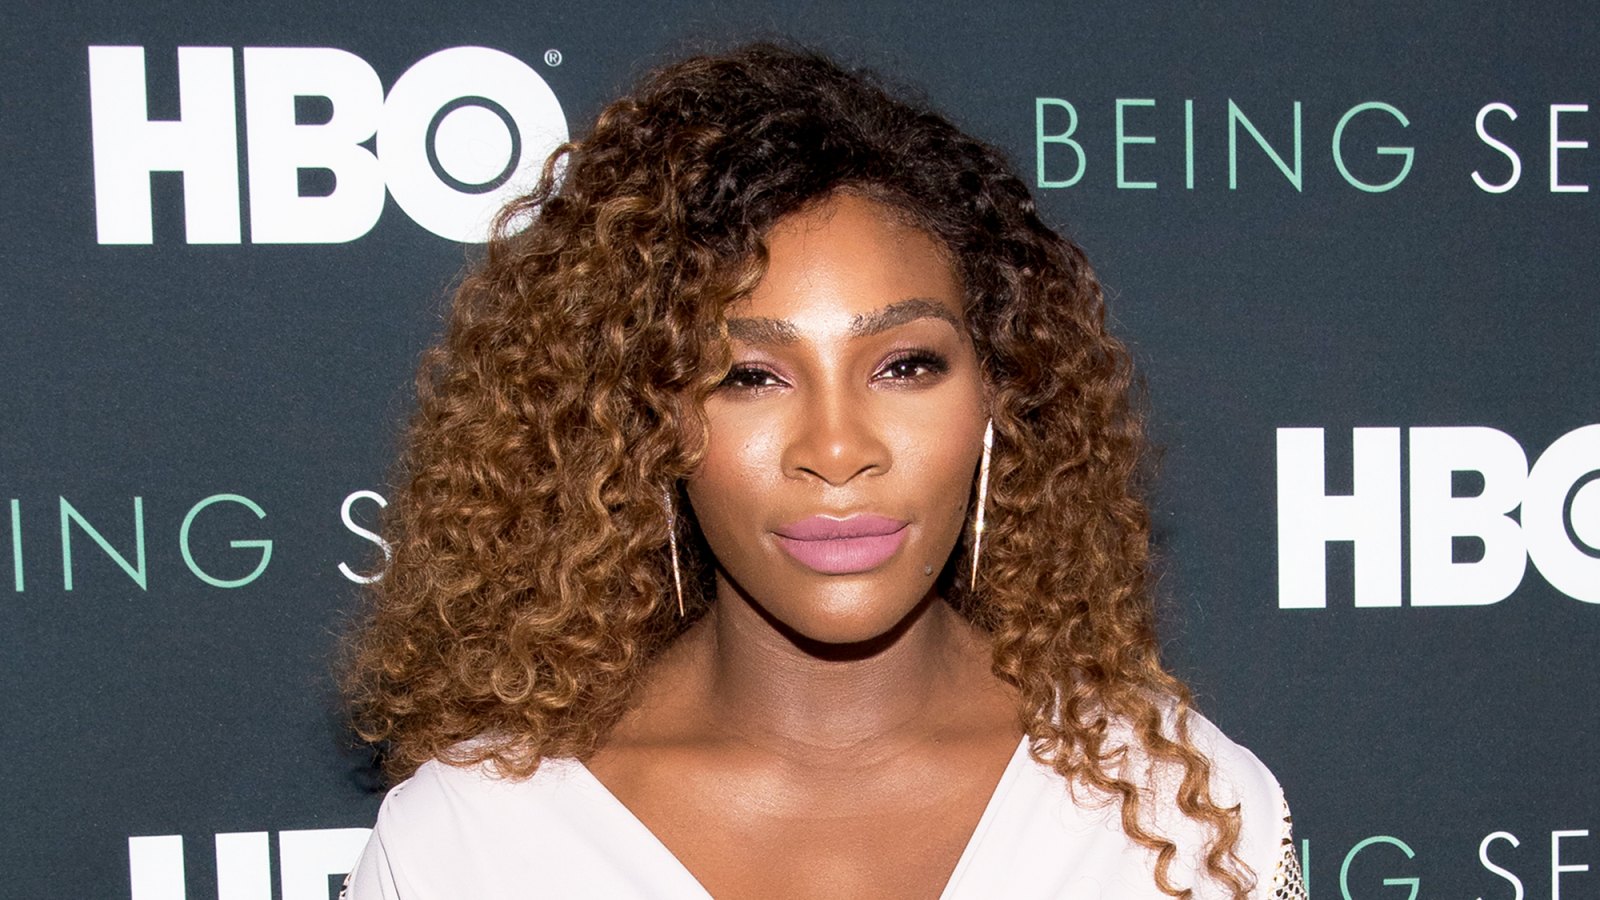 Serena Williams attends the "Being Serena" New York Premiere at Time Warner Center on April 25, 2018 in New York City.